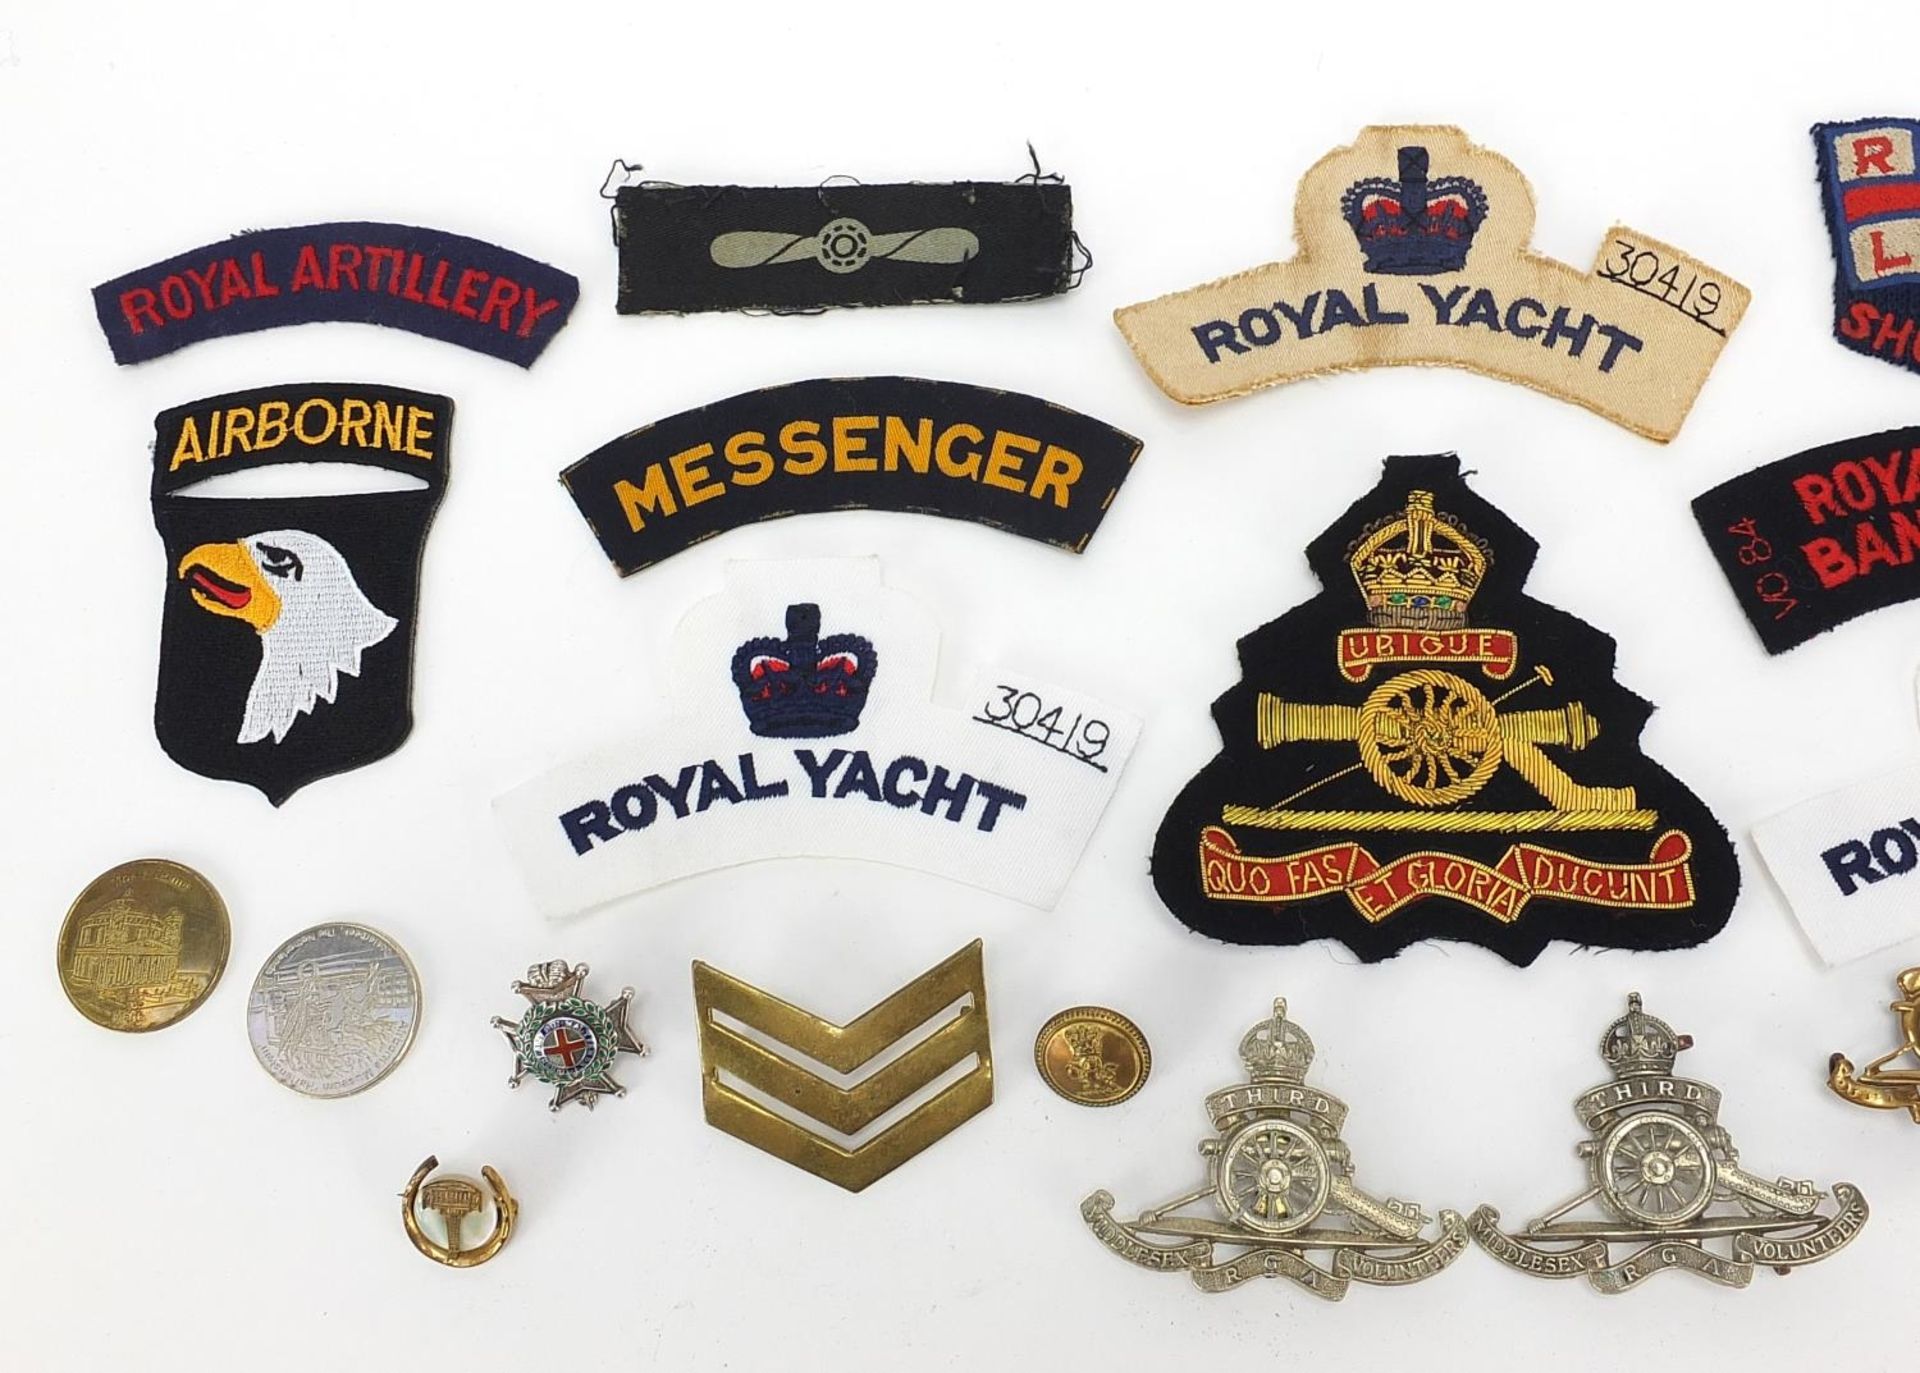 British military interest cloth patches and badges, some silver and enamel including Royal Artillery - Image 2 of 6